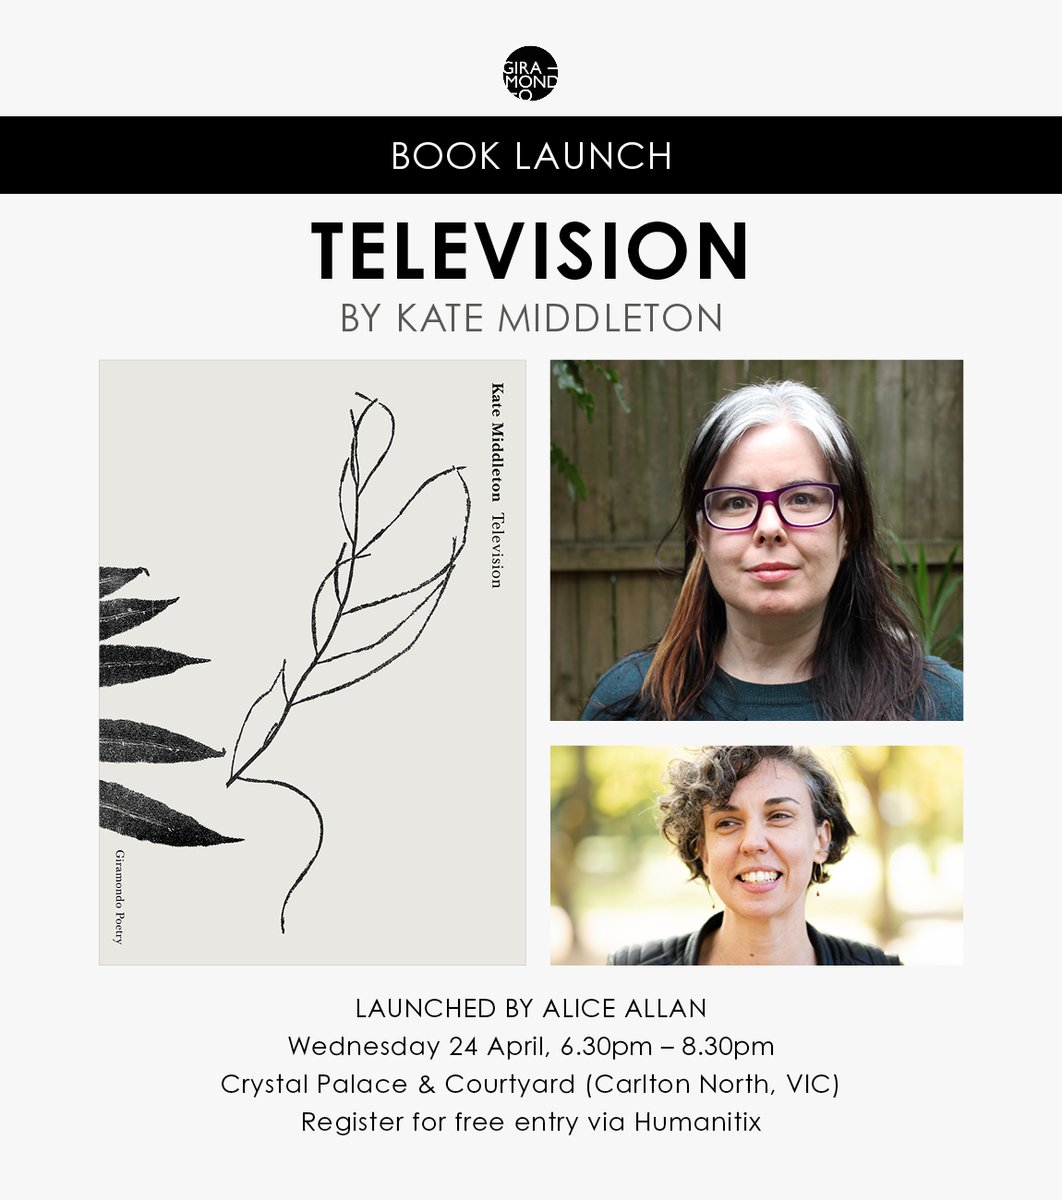 Kate Middleton’s Television launches tonight at the Crystal Palace in Melbourne! 📺📕 Last chance to RSVP: events.humanitix.com/book-launch-vi…